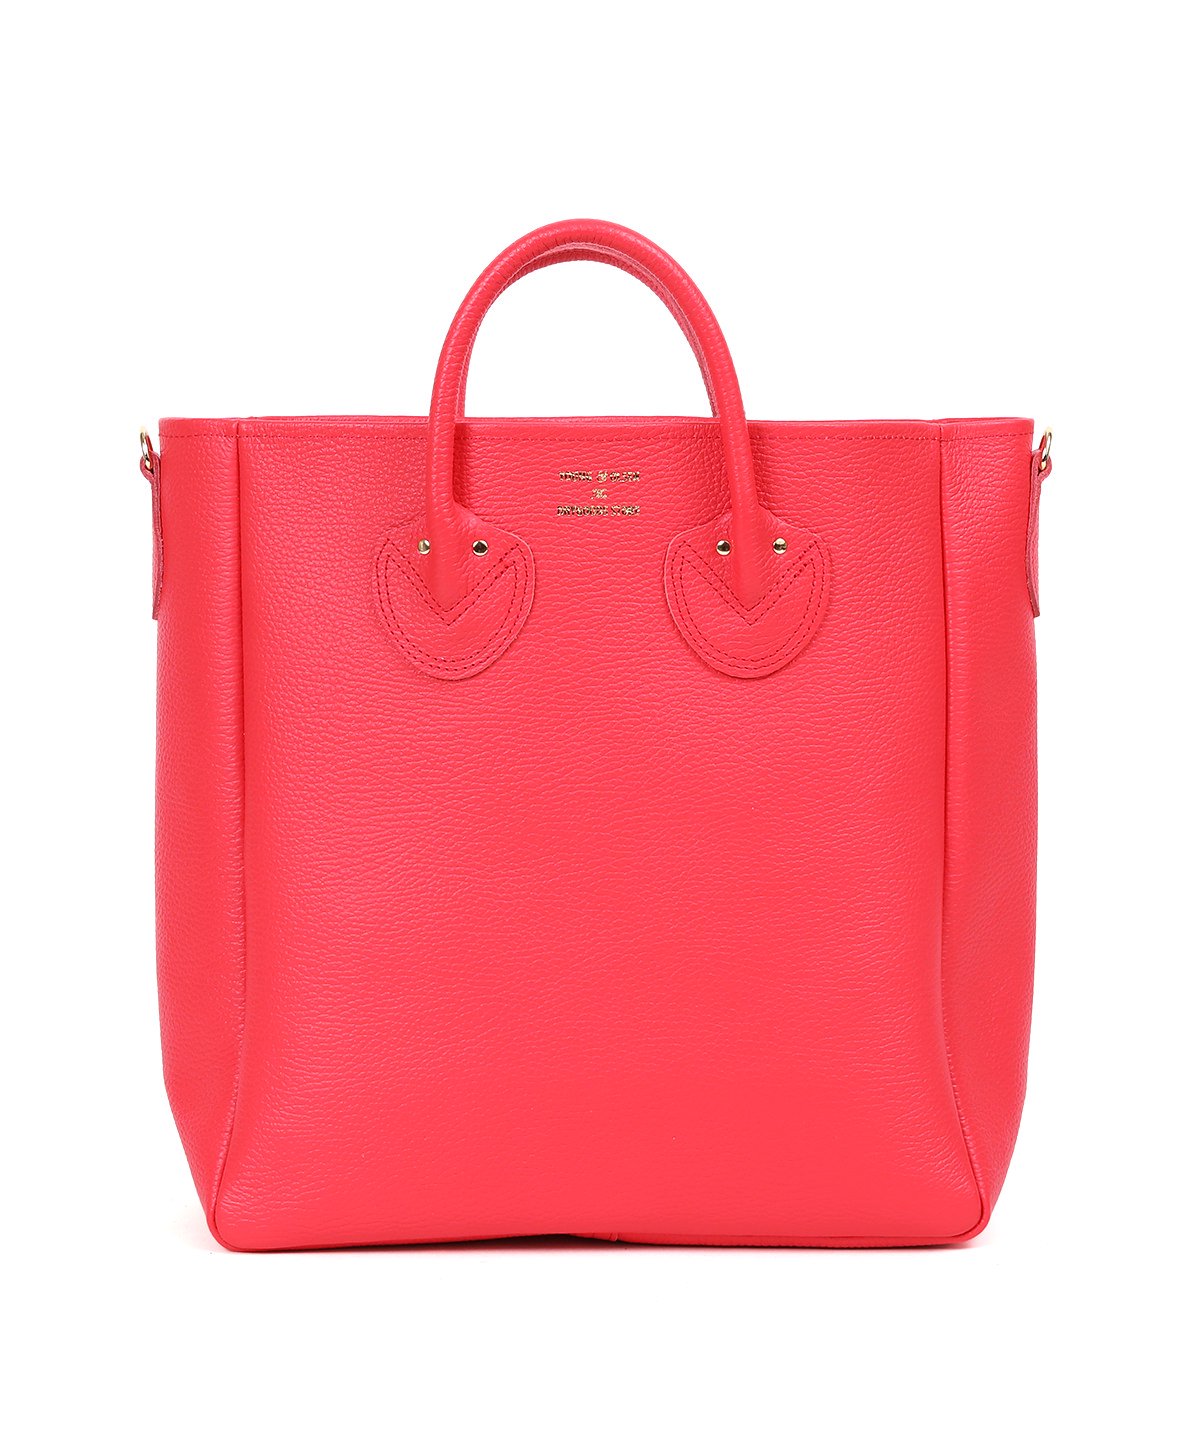 EMBOSSED LEATHER D TOTE M